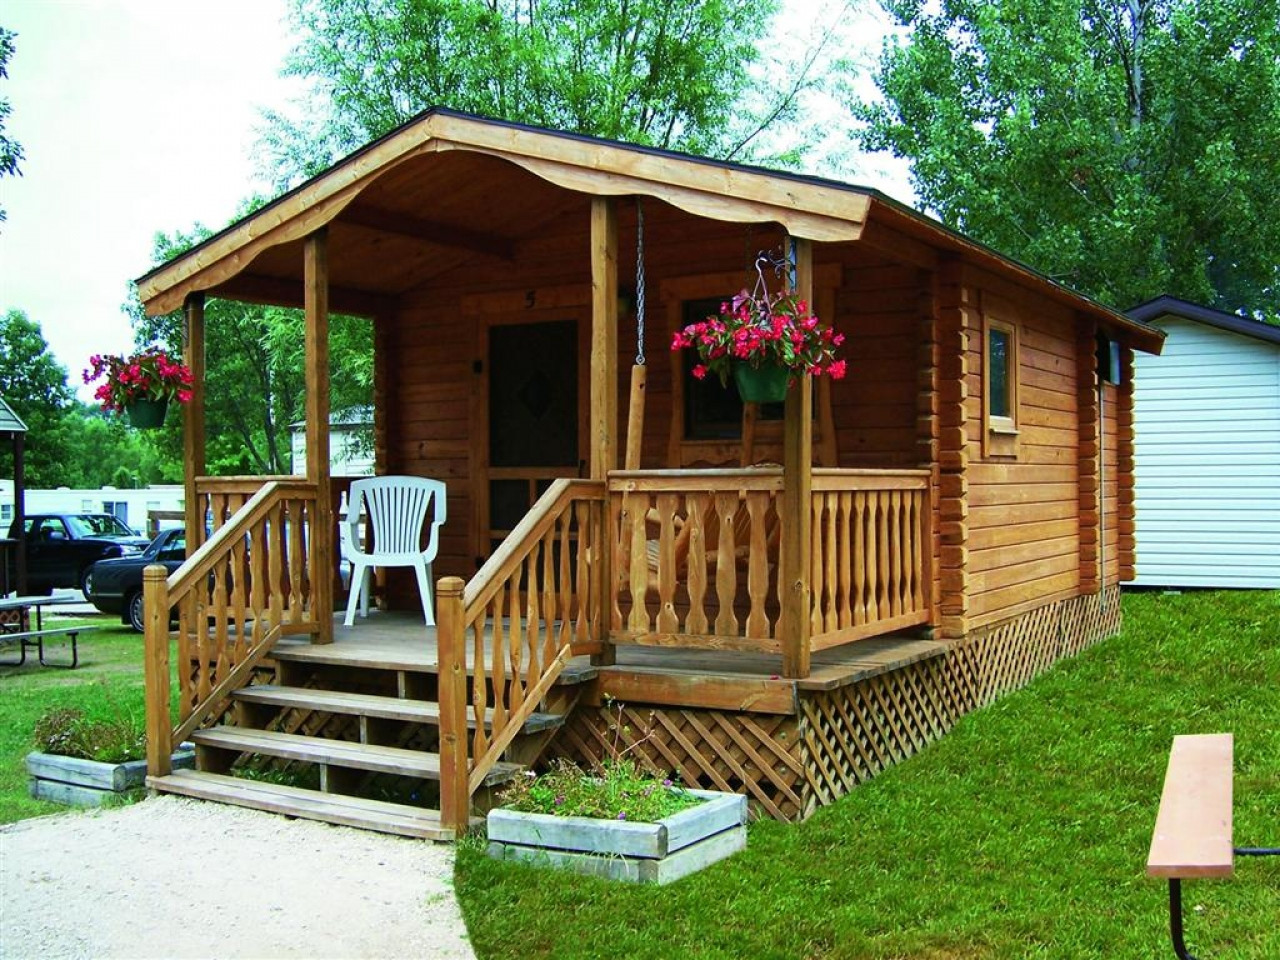 Small One Bedroom House
 Small e Bedroom Cabins Small Cabin Kits one bedroom log